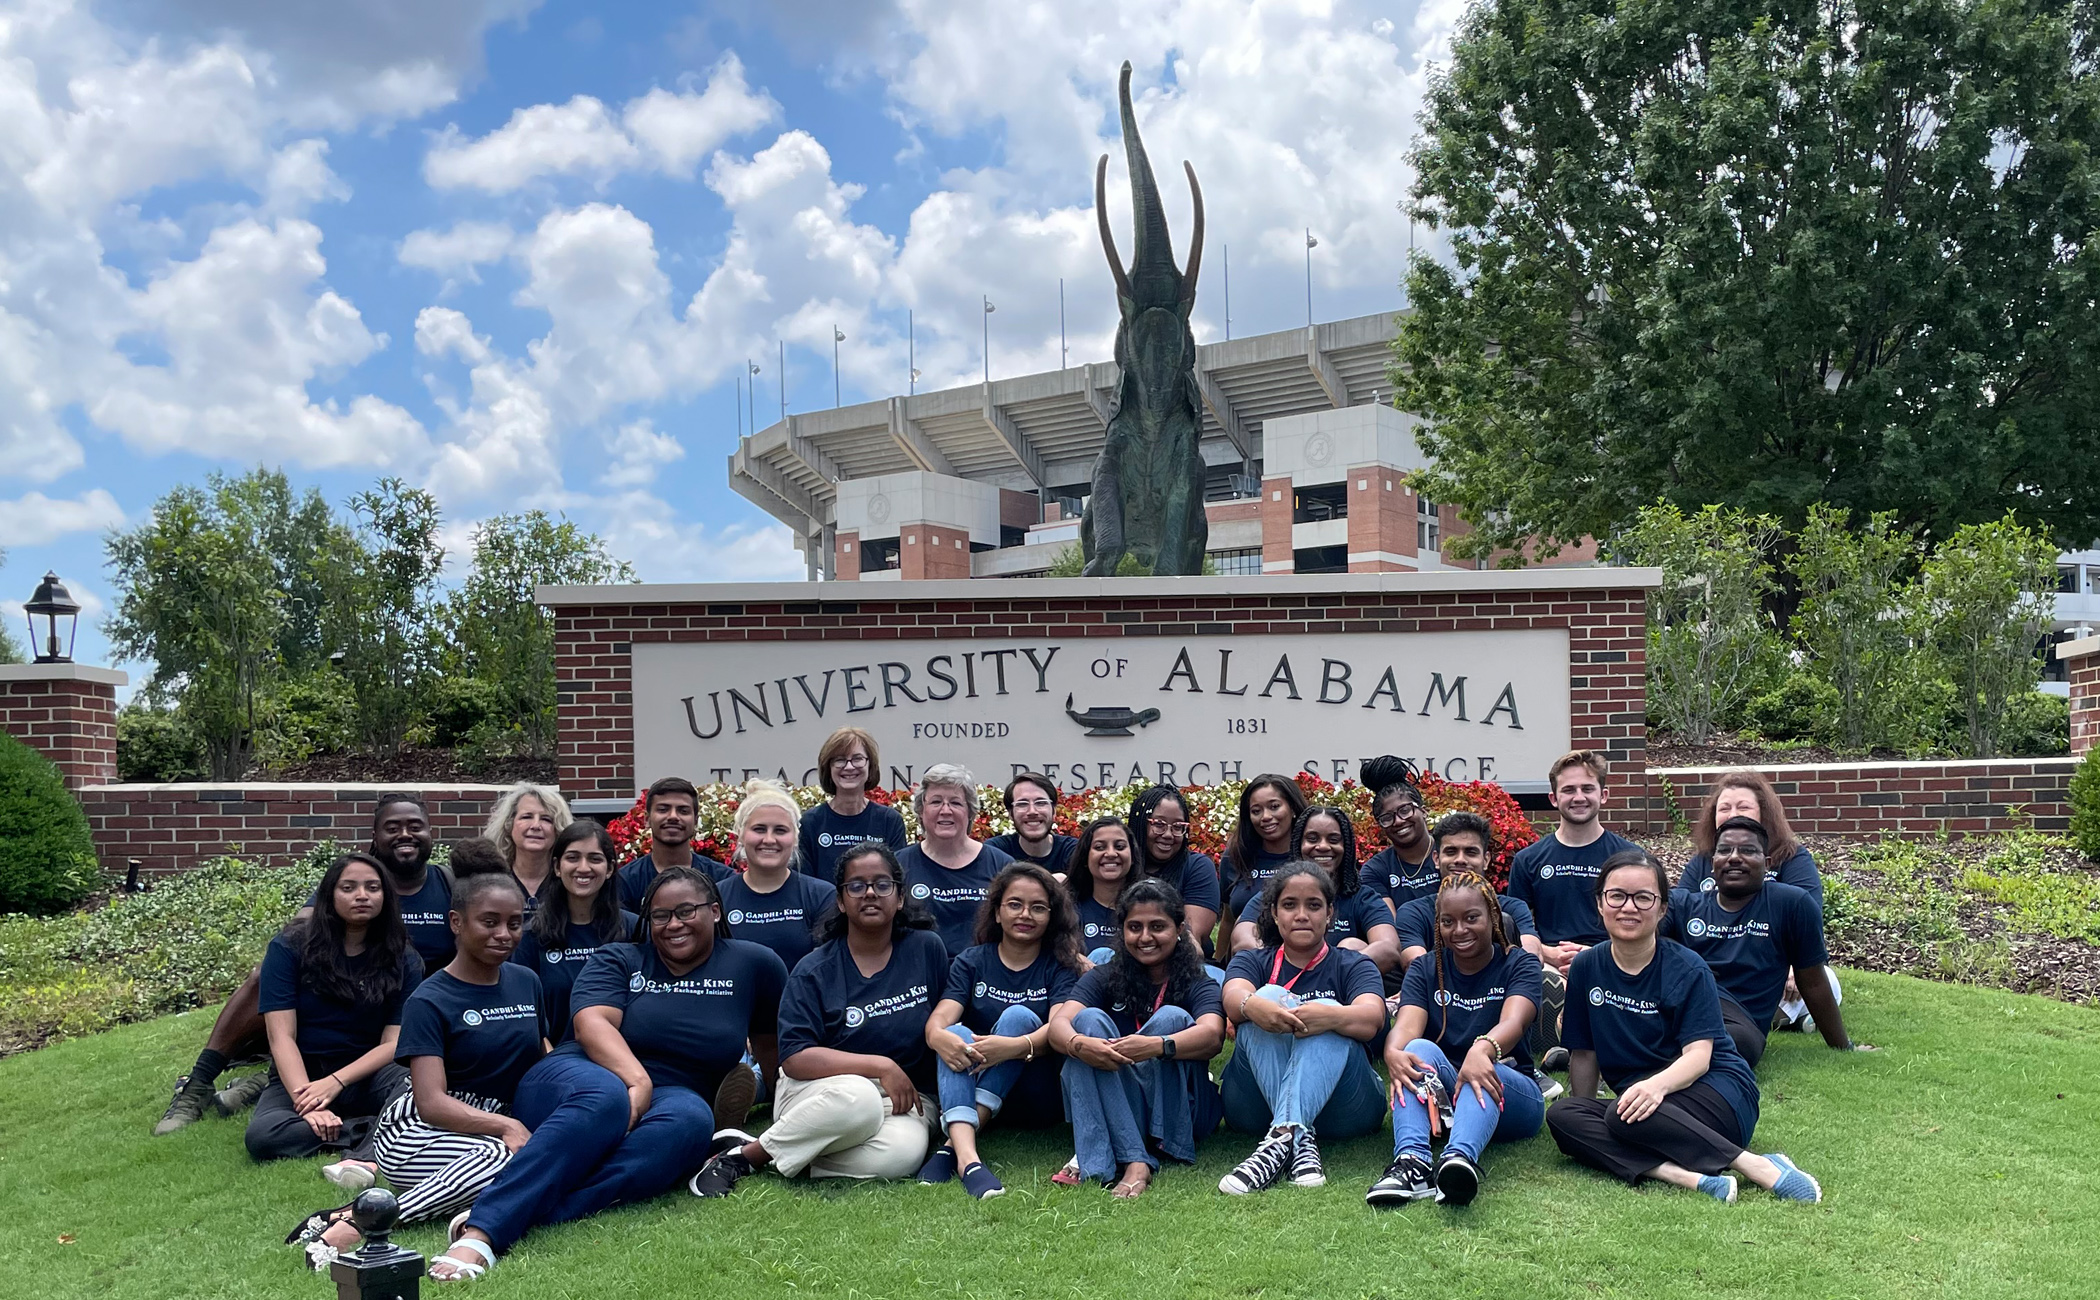 The Gandhi King student and faculty participants in front of a University of Alabama sign